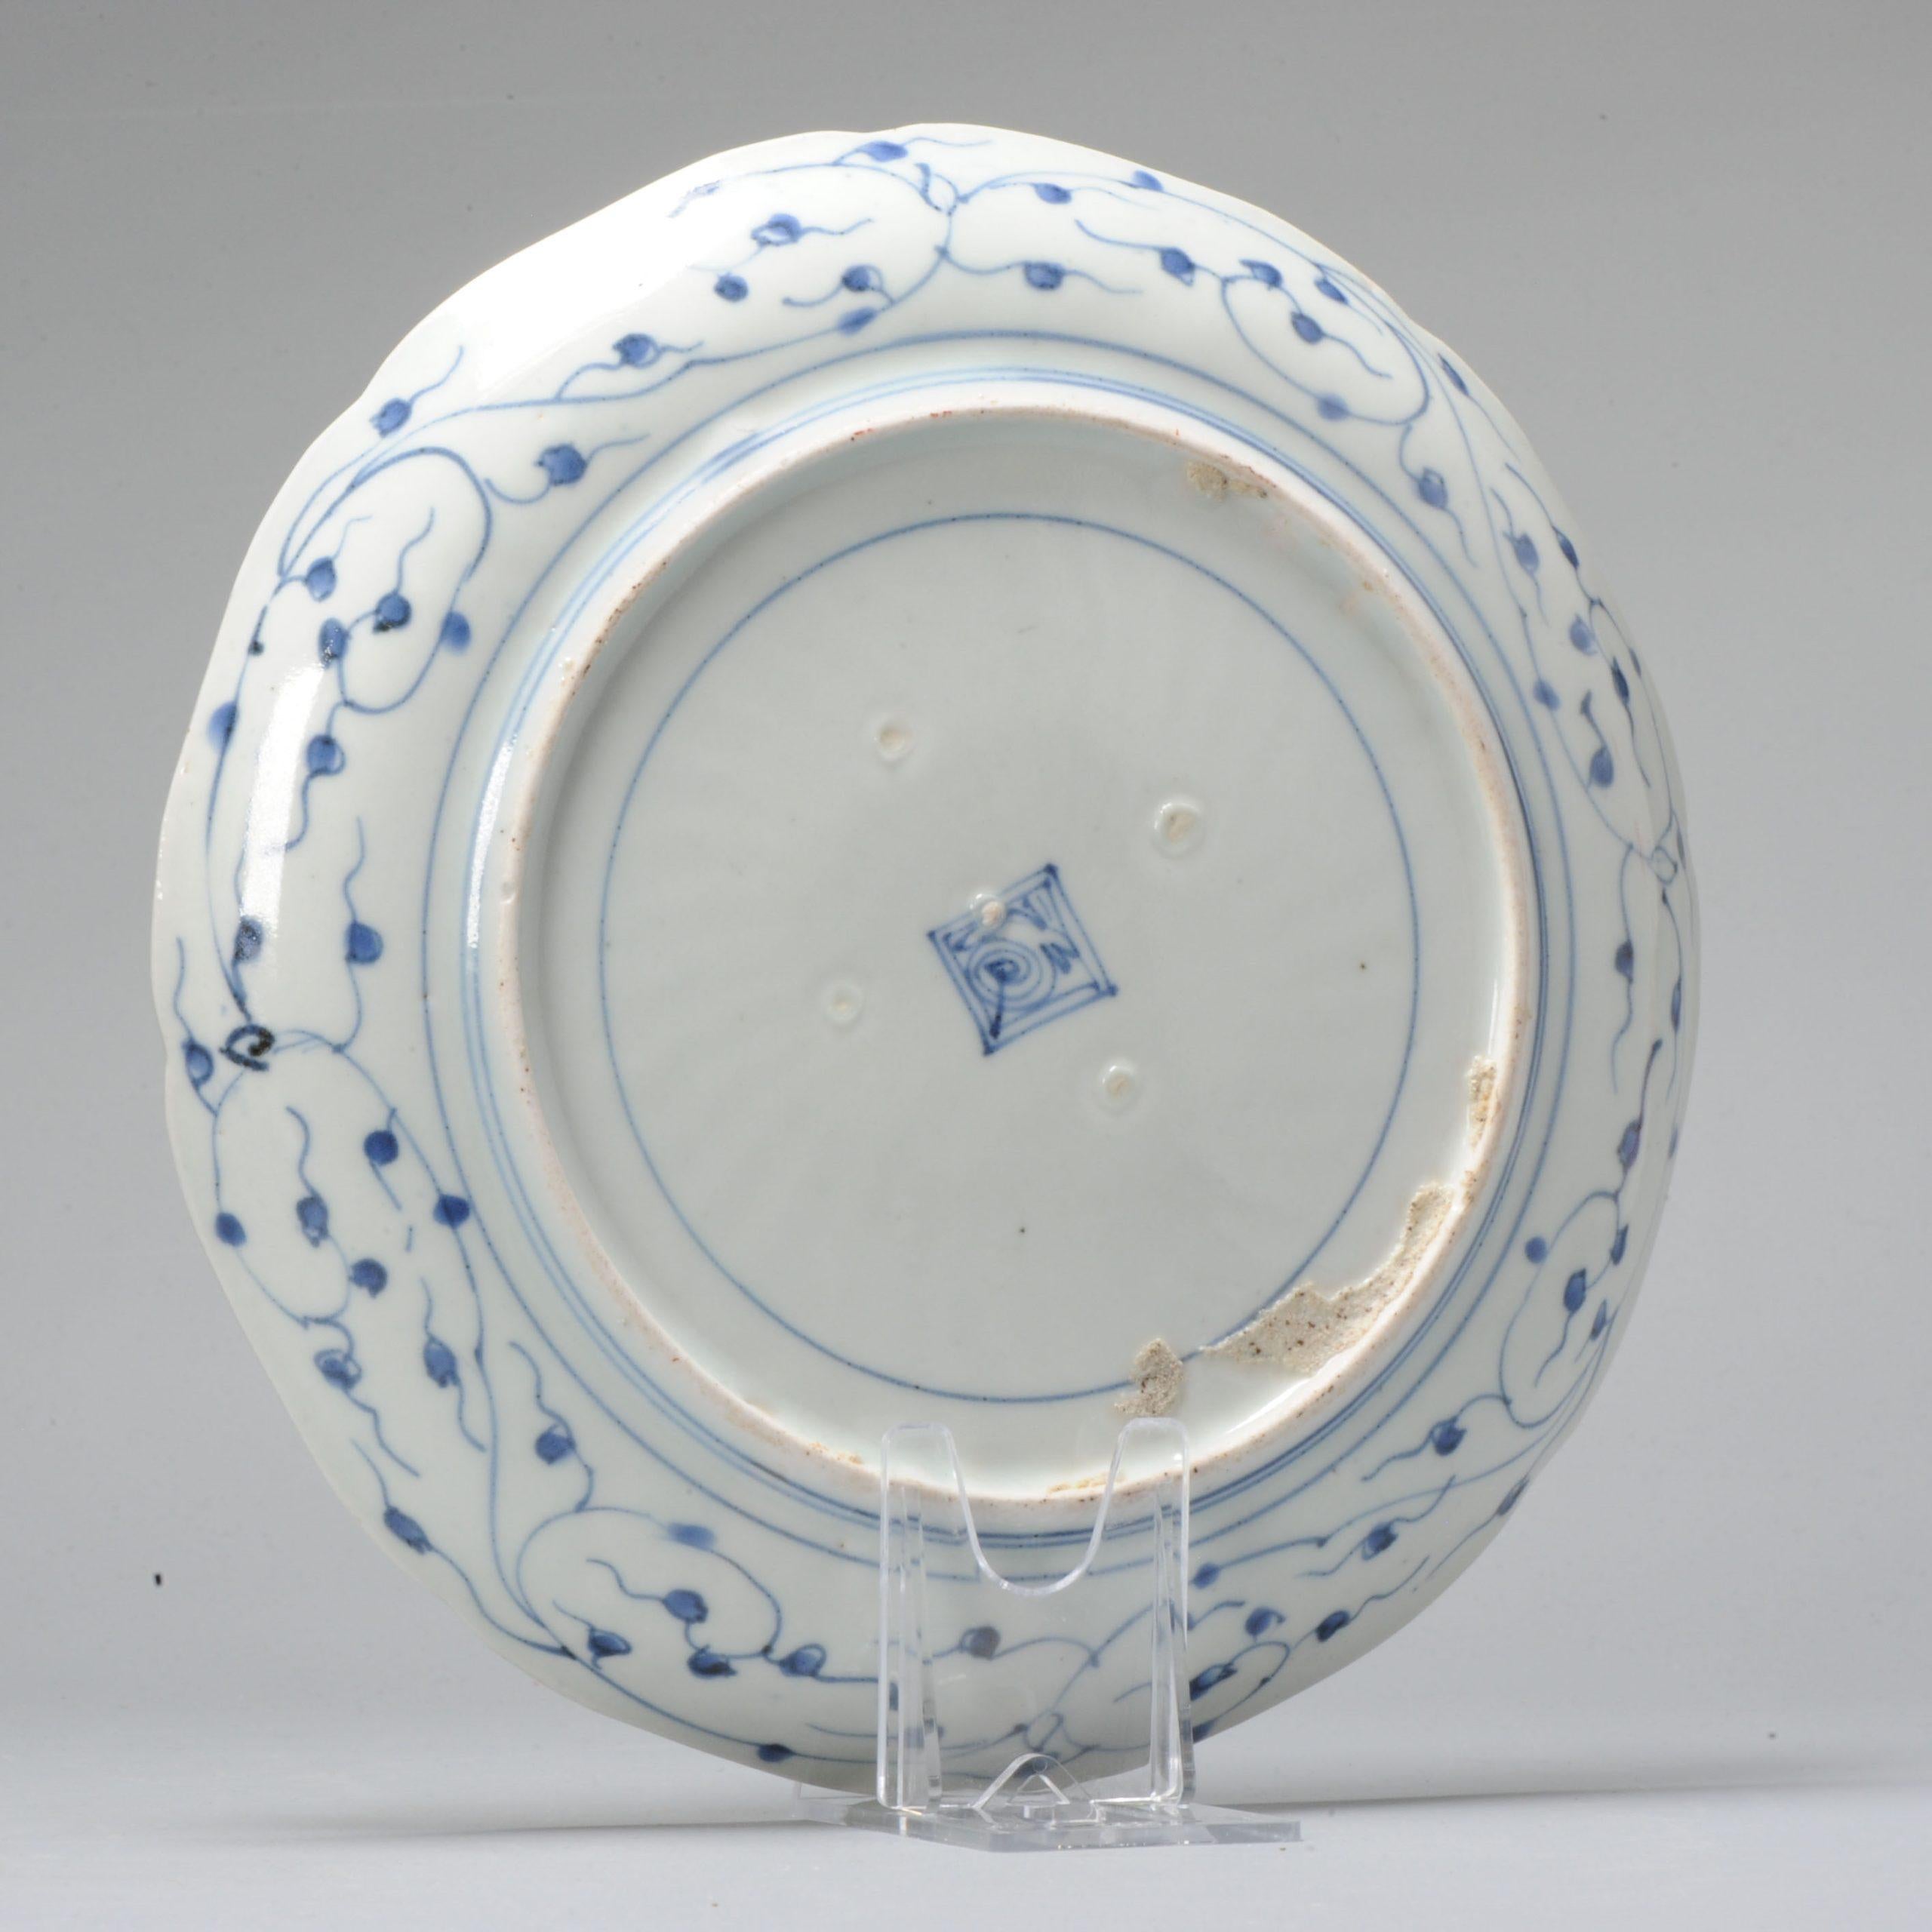 Edo Period 17/18C Japanese Porcelain Dish Polychrome Kakiemon or Arita with Fuku In Good Condition For Sale In Amsterdam, Noord Holland